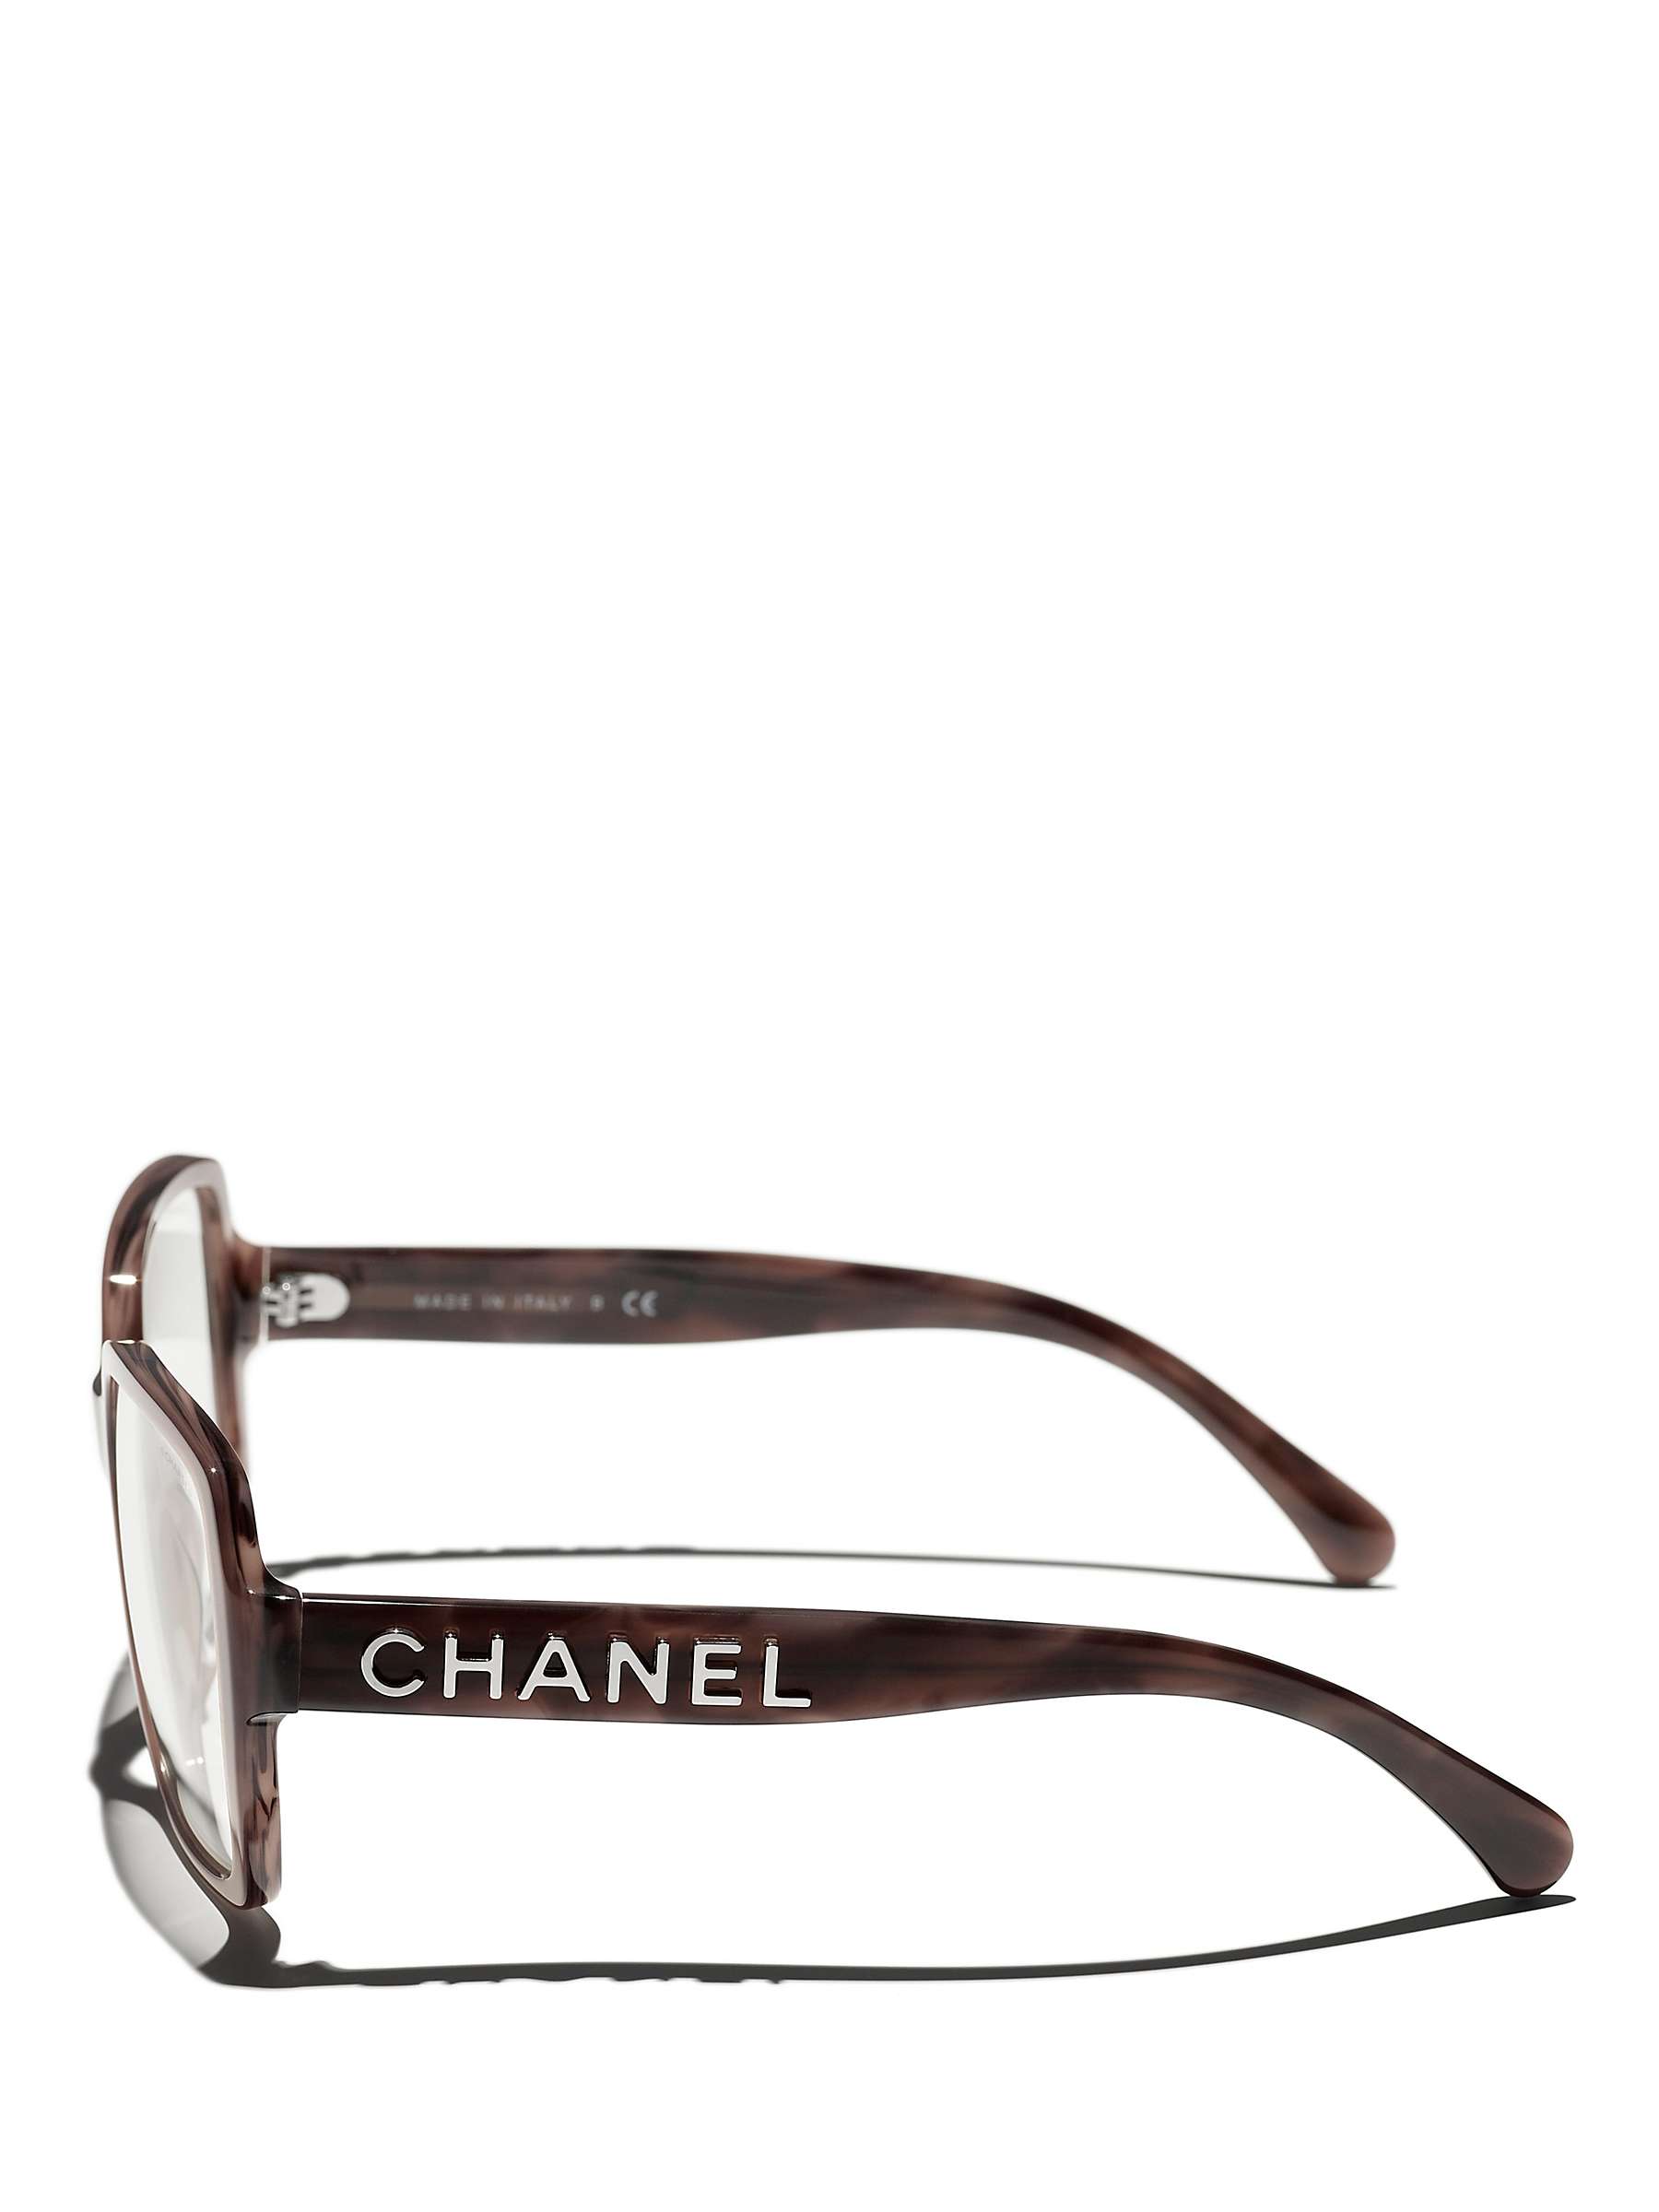 Buy CHANEL Rectangular Sunglasses CH5408 Shiny Pink/Clear Online at johnlewis.com